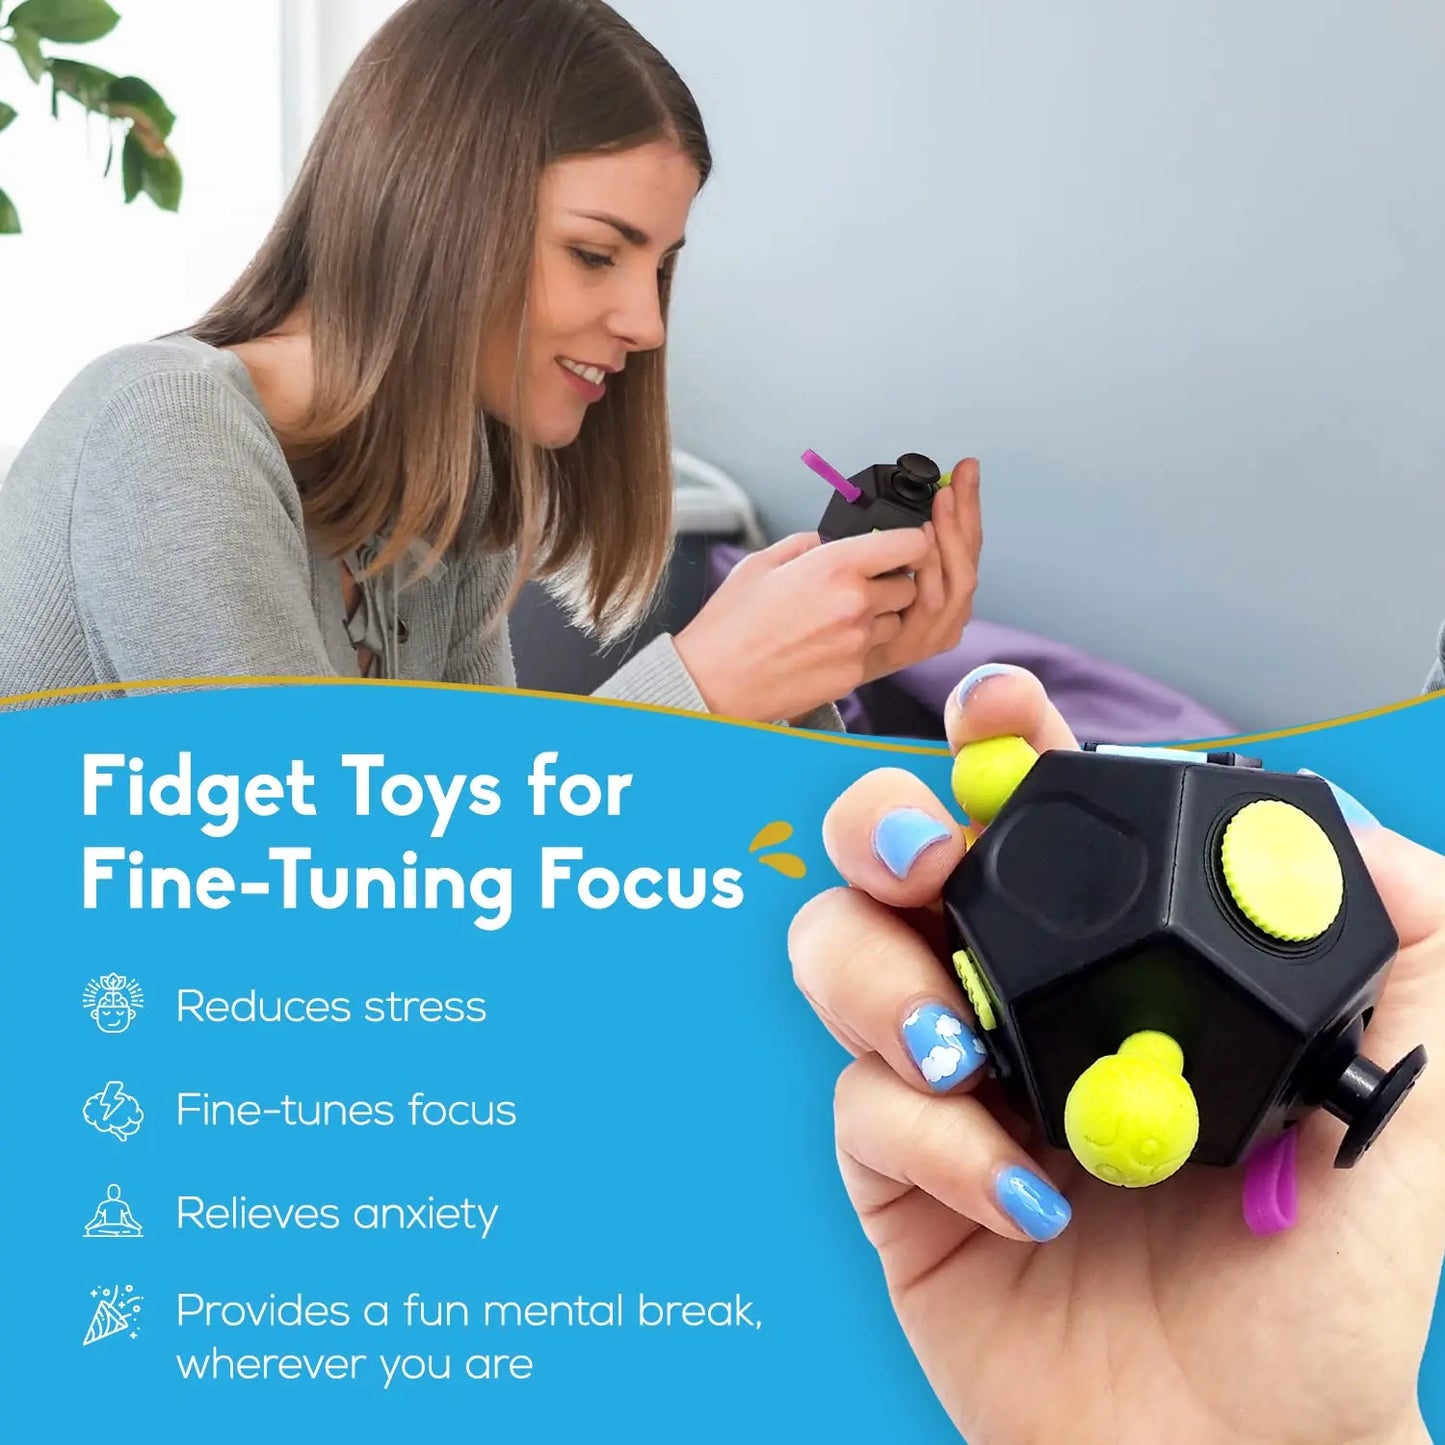 12 Sides Fidget Cube Toys Anti-Stress Antistress Sensory Toys For Children Kids Adults Autism ADHD OCD Anxiety Relief Focus